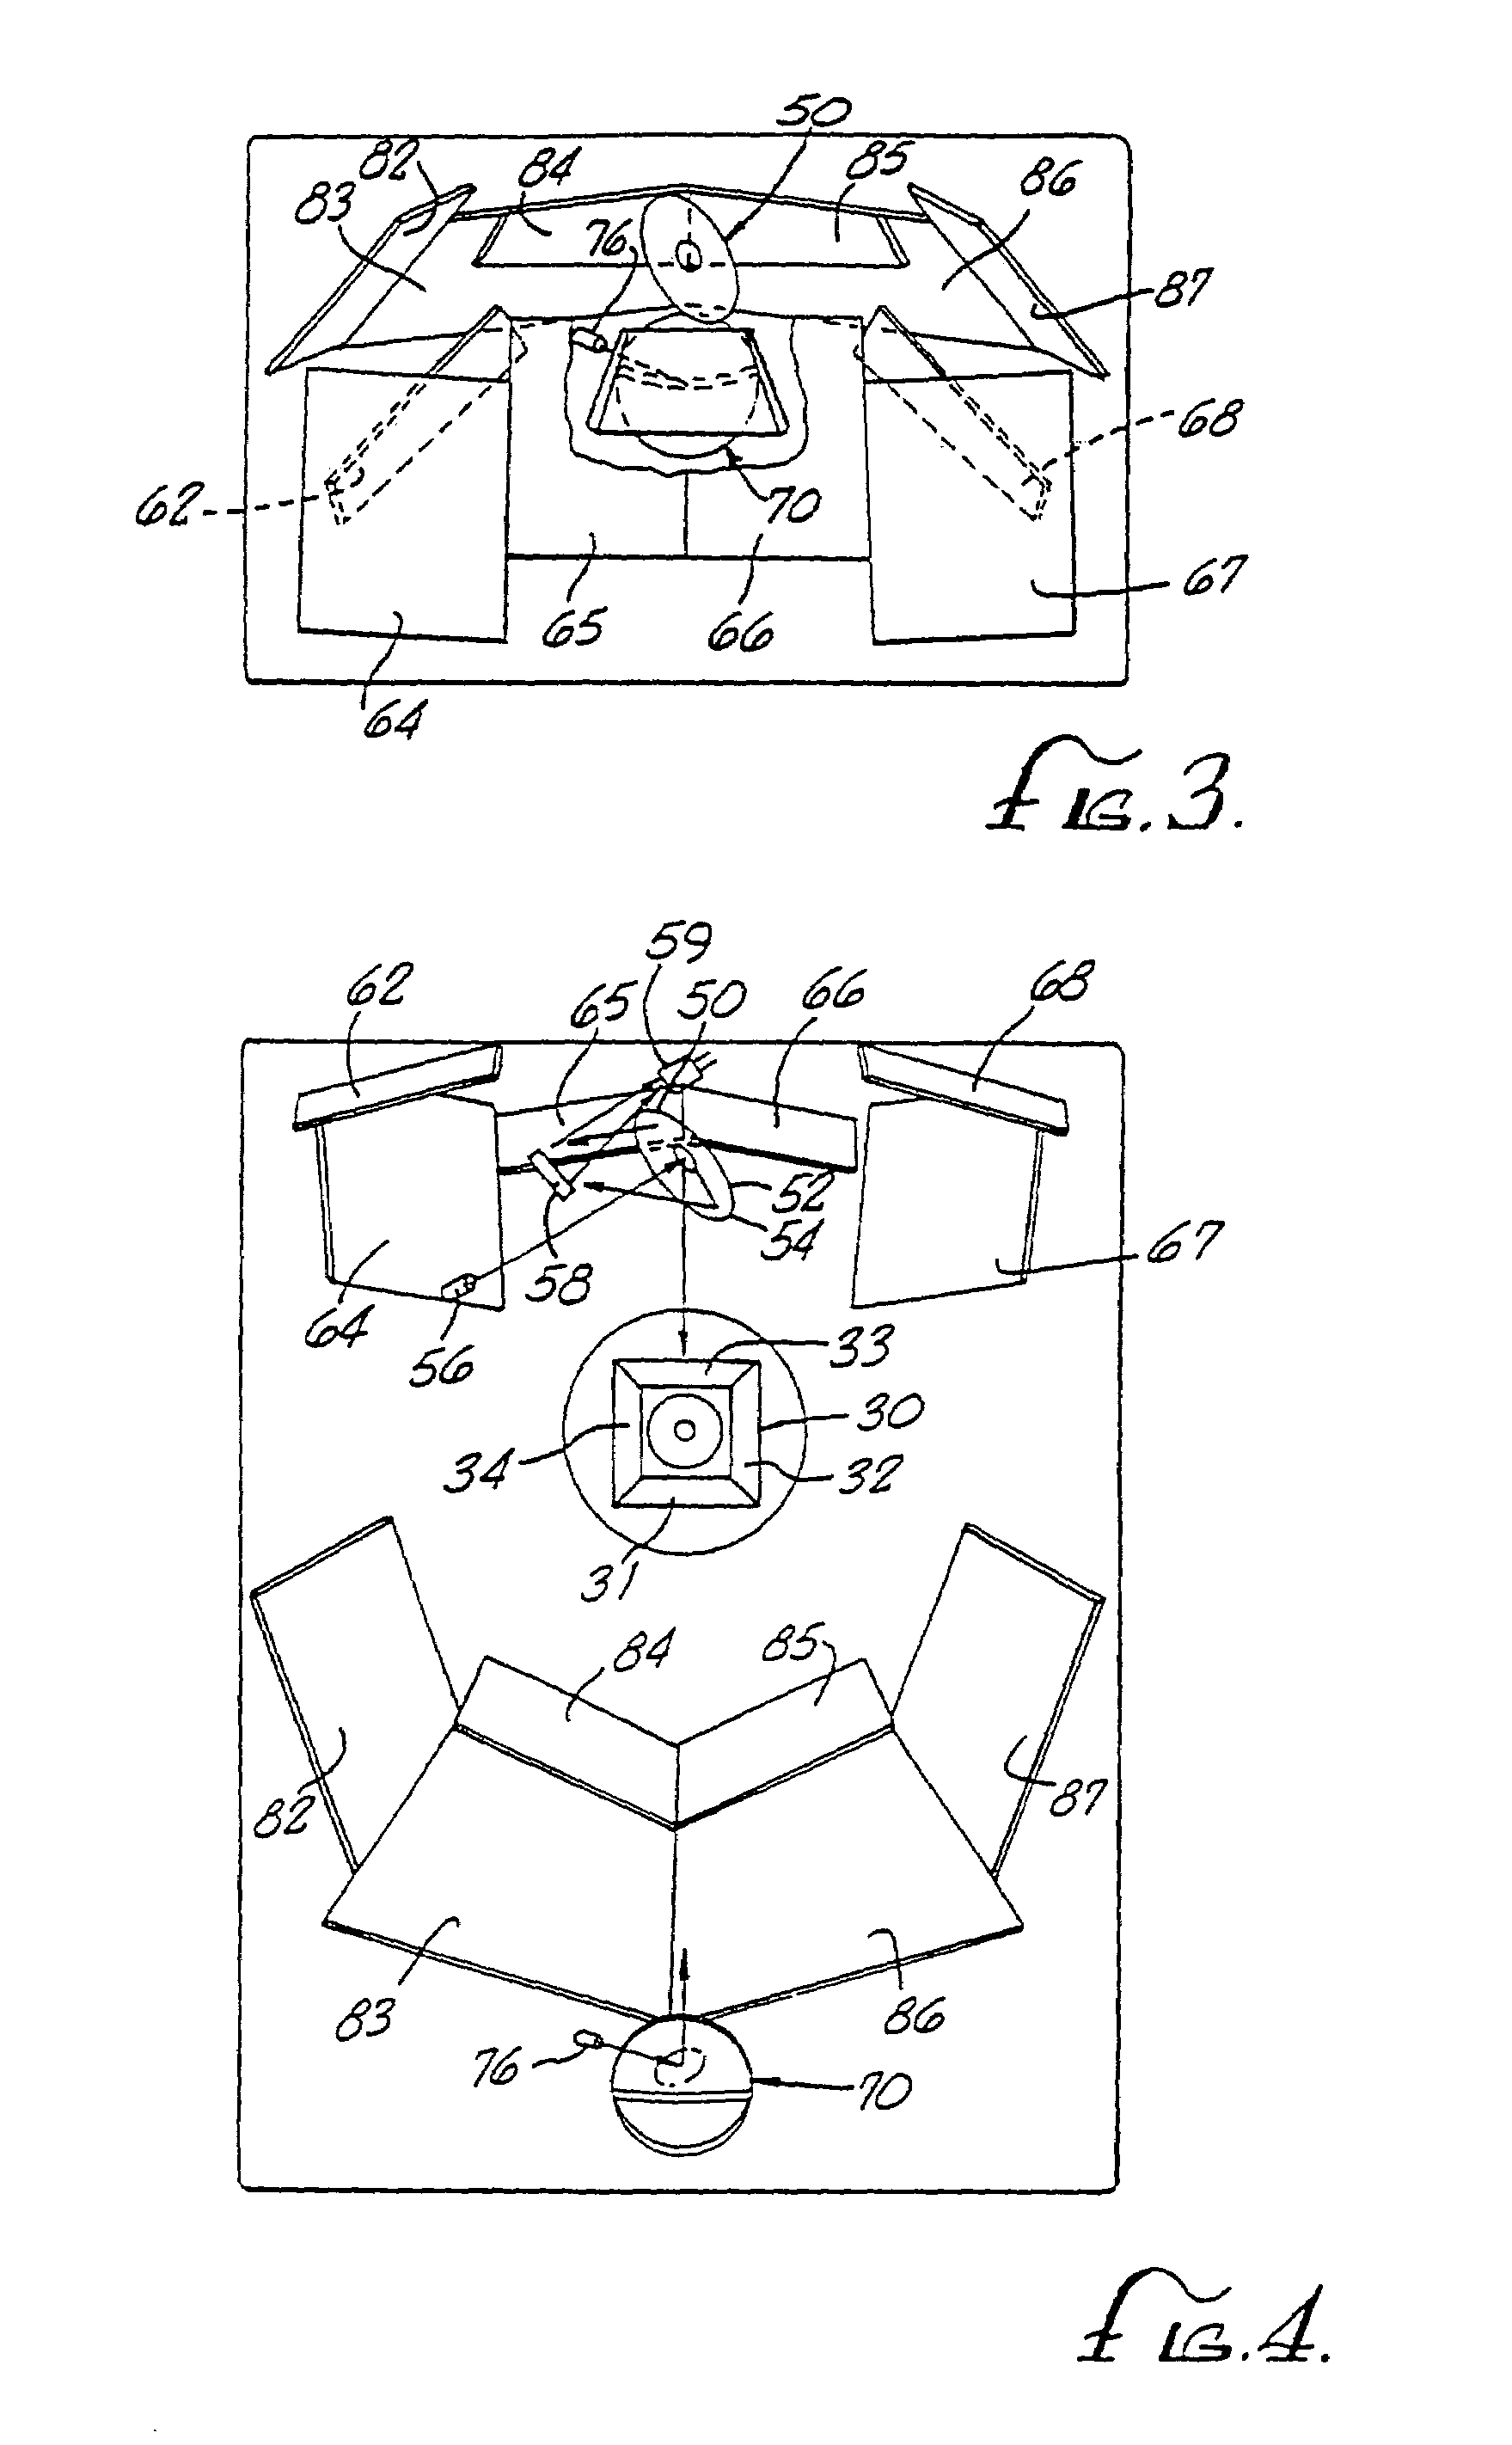 Multiple plane scanning system for data reading applications